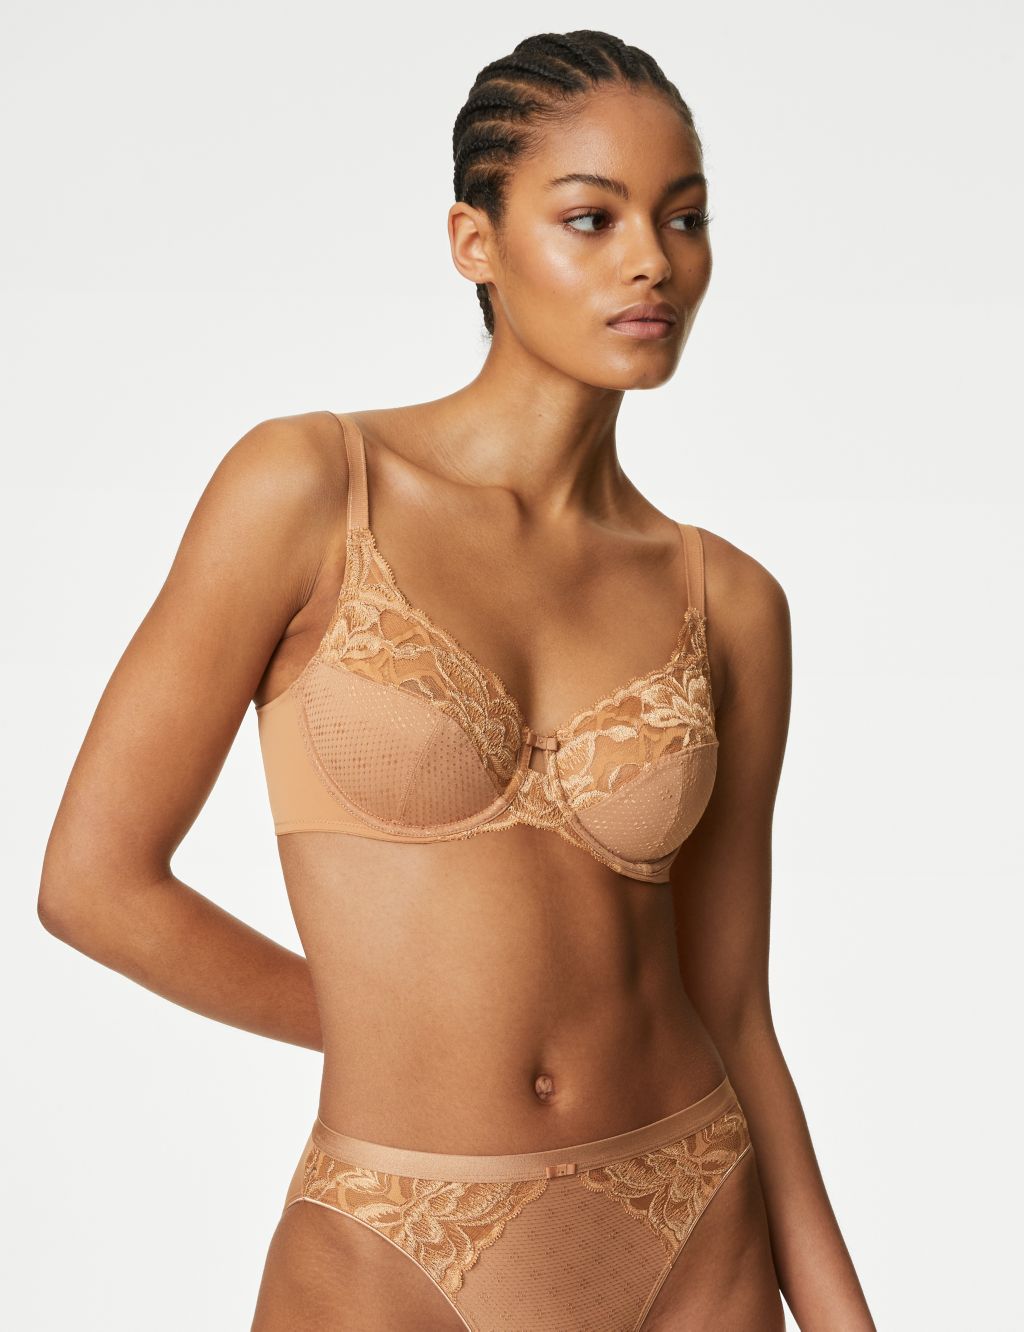 Wild Blooms Wired Full Cup Bra A-E image 1